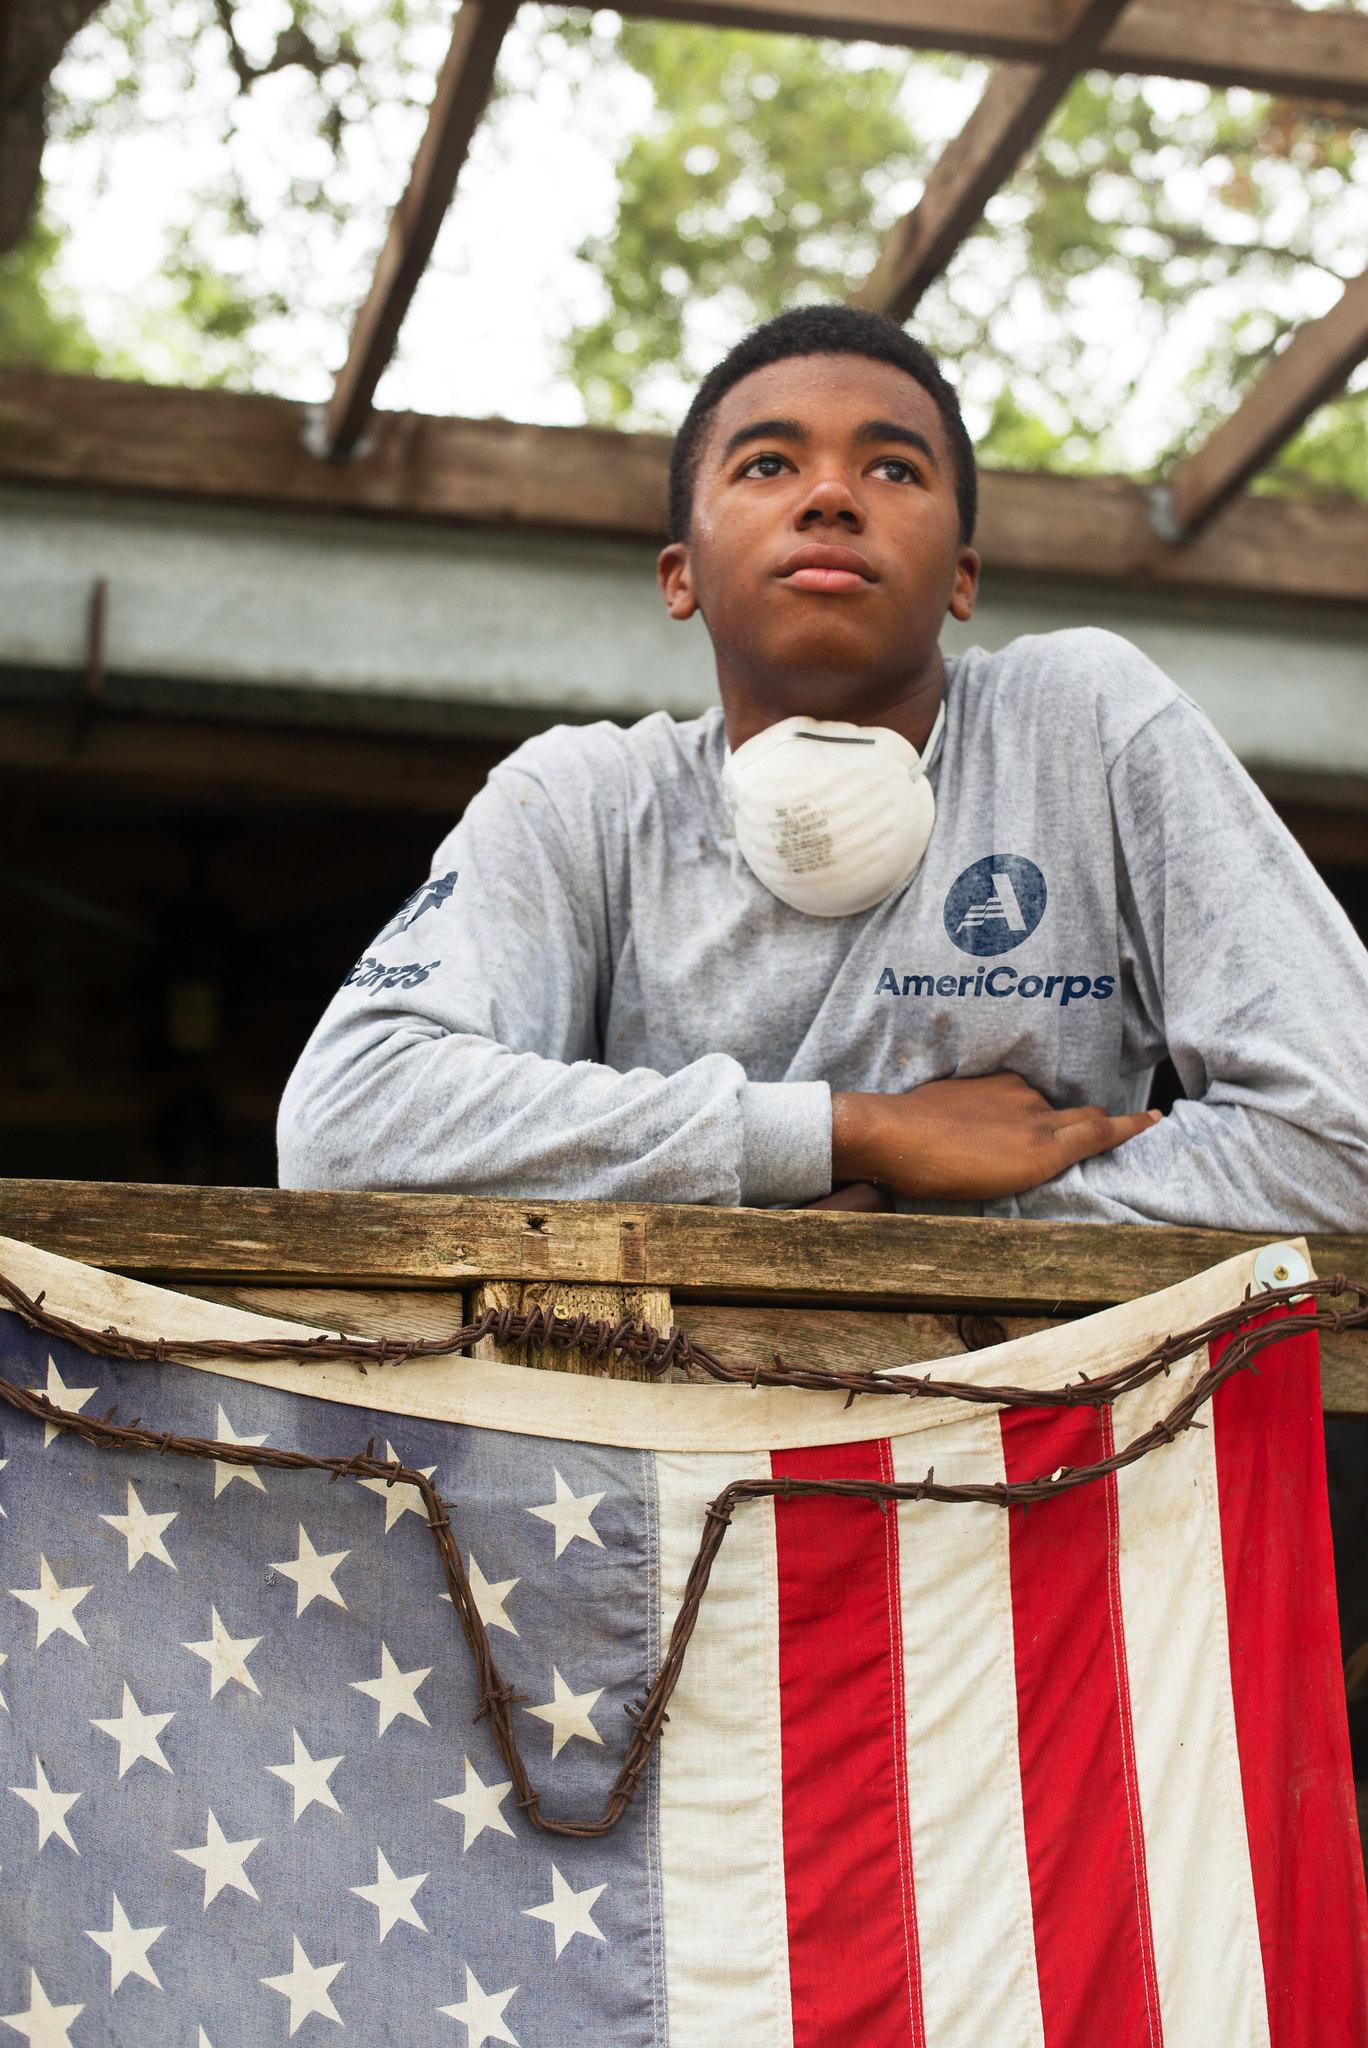 AmeriCorps member with American flag 